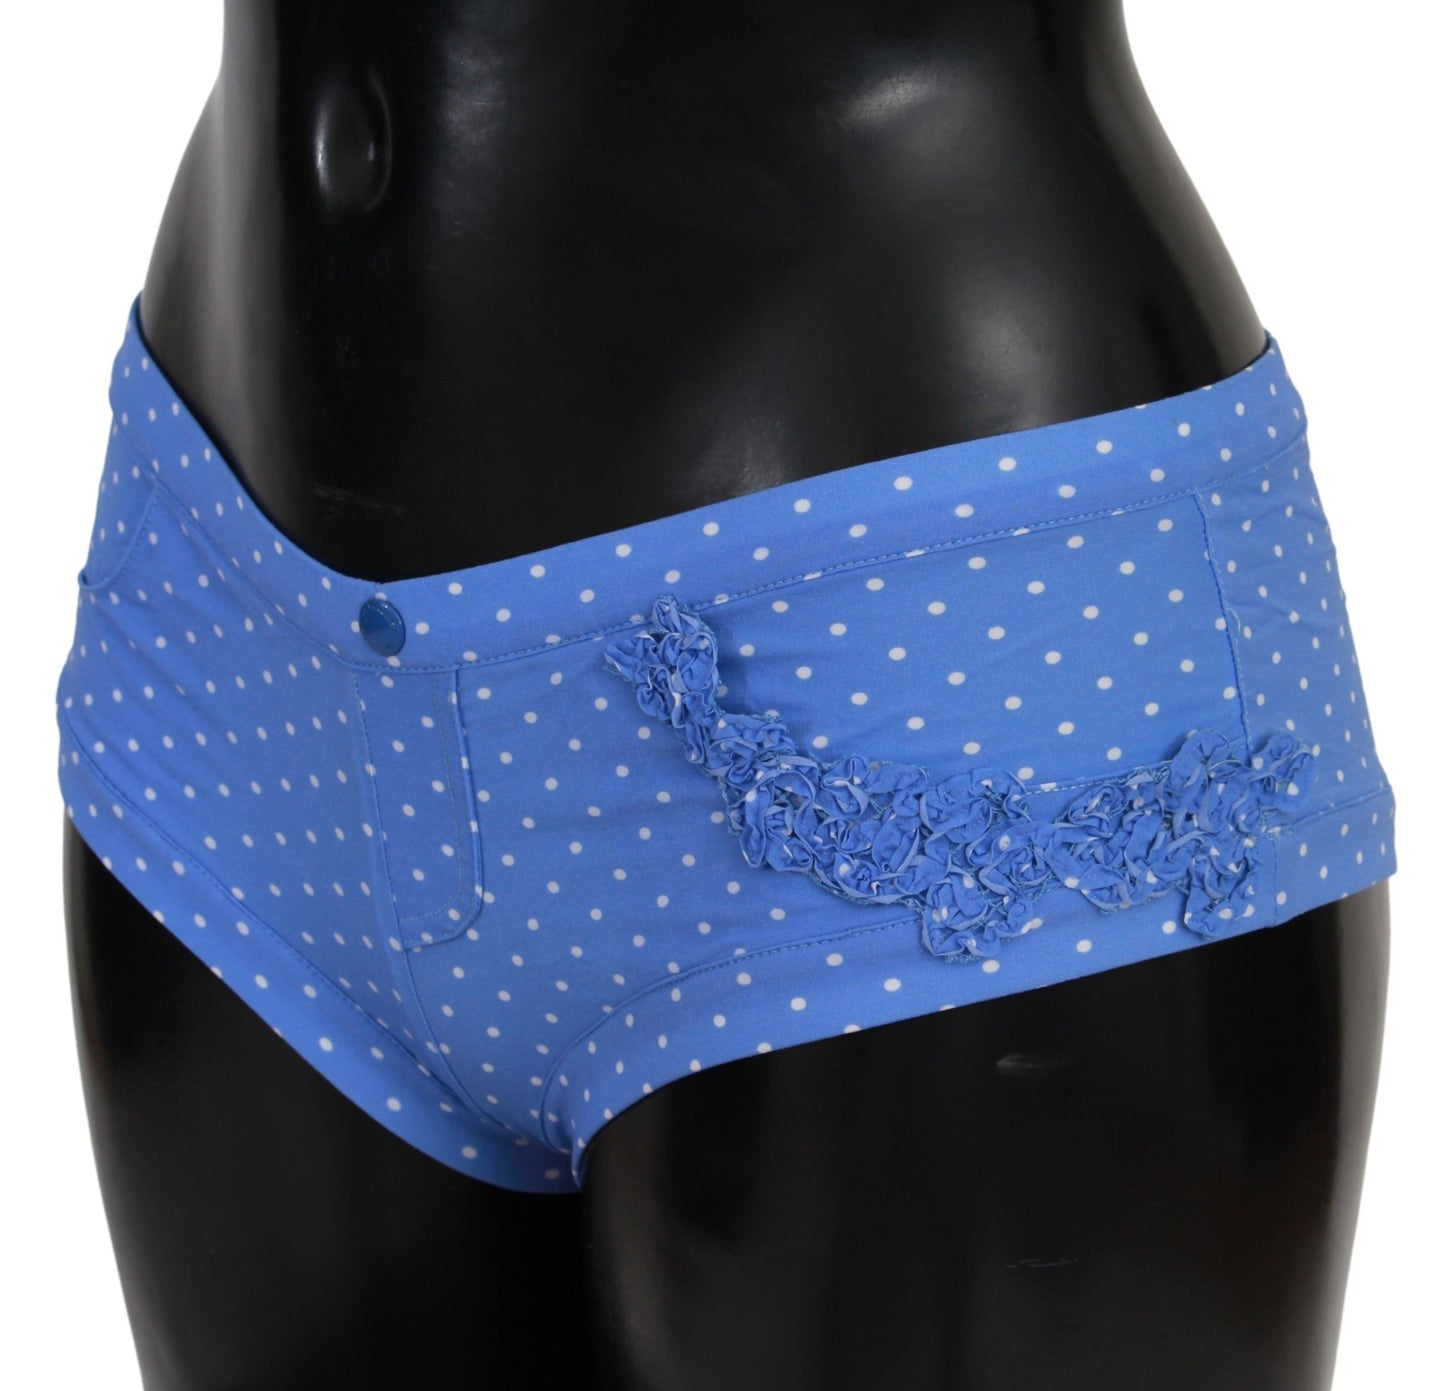 Blue Shorts Beachwear Bikini Bottoms Swimsuit - Designed by Ermanno Scervino Available to Buy at a Discounted Price on Moon Behind The Hill Online Designer Discount Store